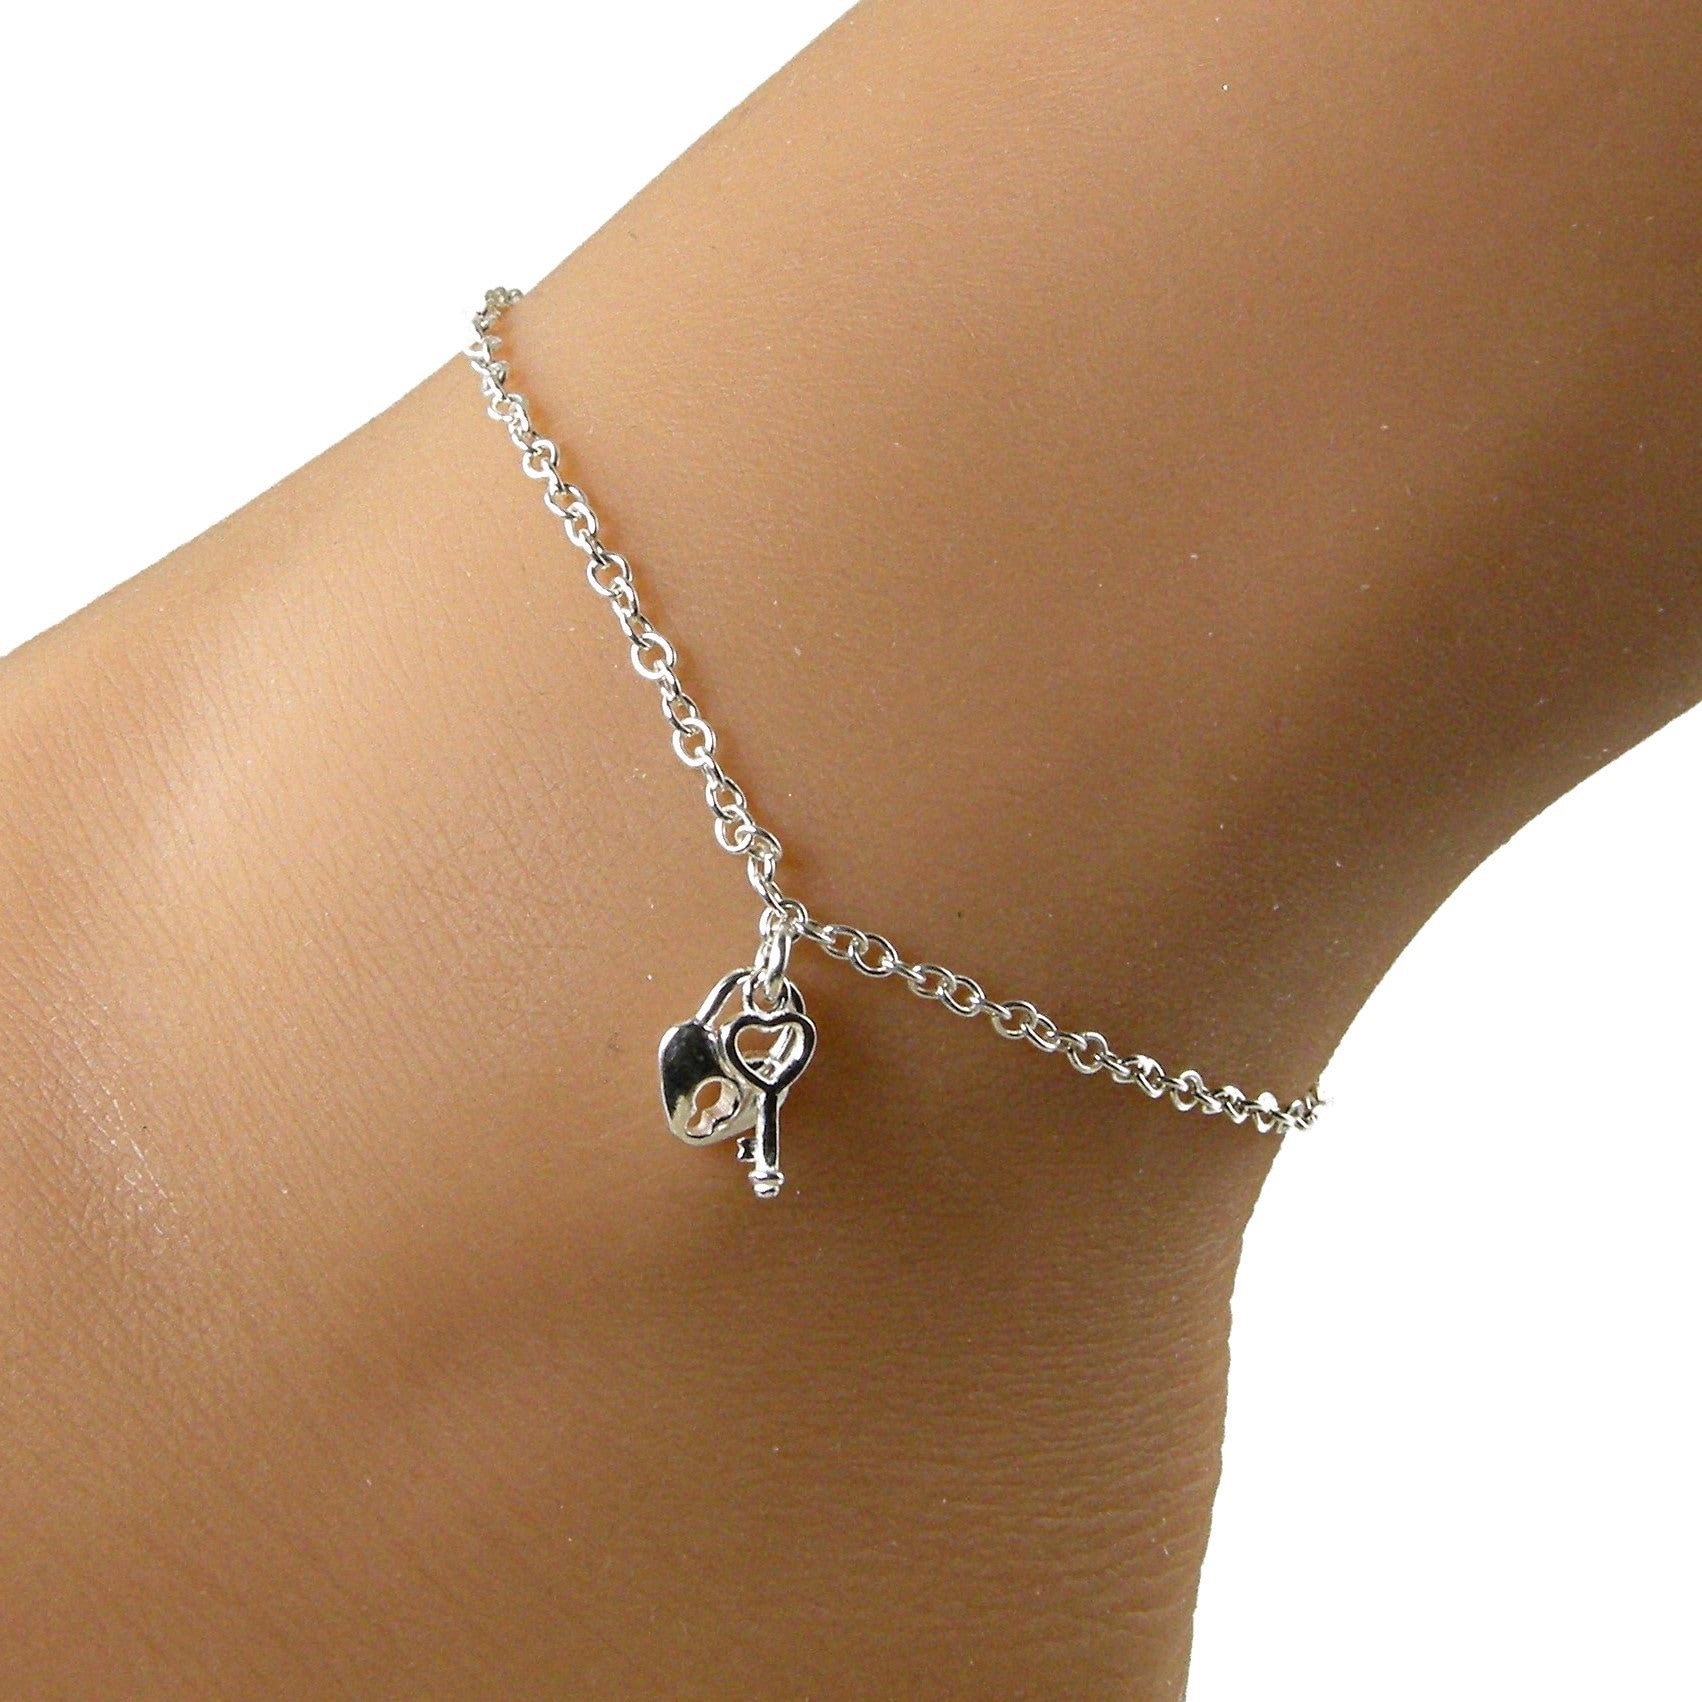 Hotwife Anklet, Infinity Heart Anklet, Polyamory Anklet, Everyday Anklet,  Kinky Anklet, Sexy Anklets, Swinger Jewelry - Etsy